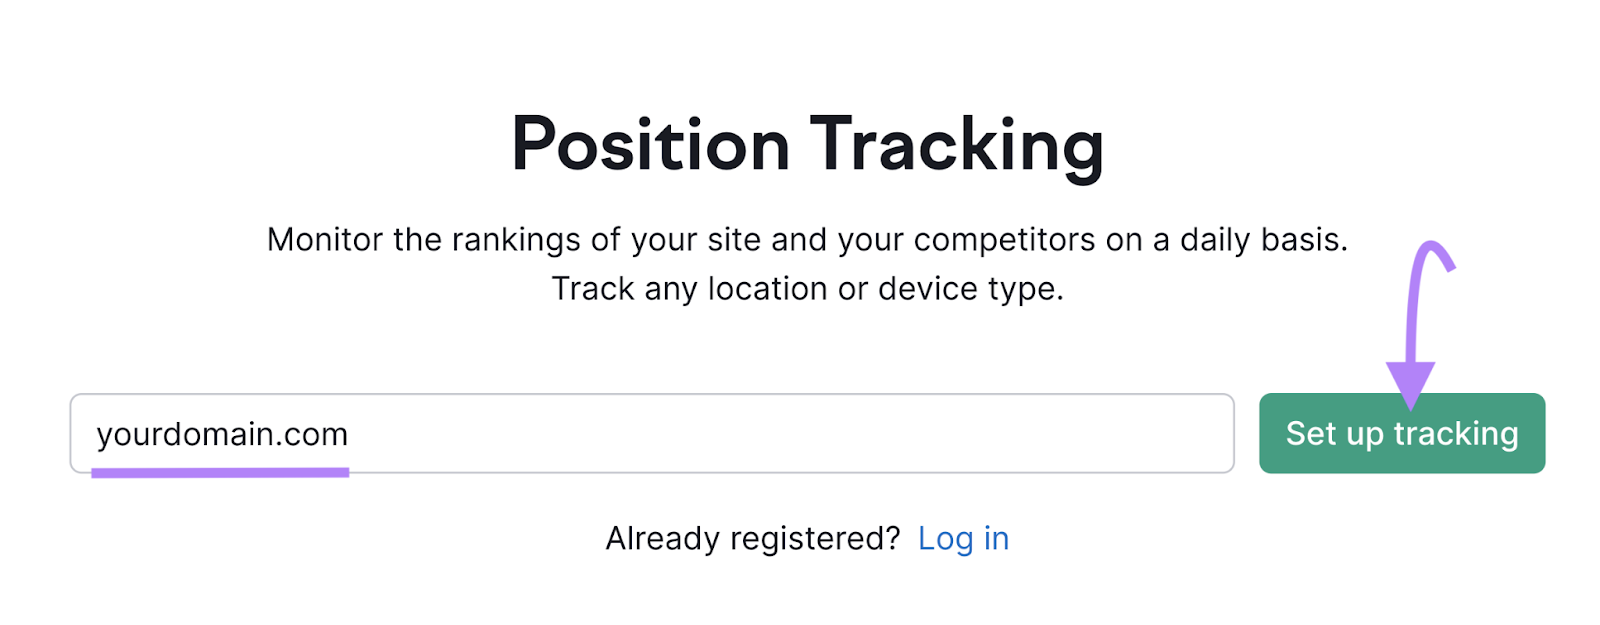 Position Tracking tool search bar